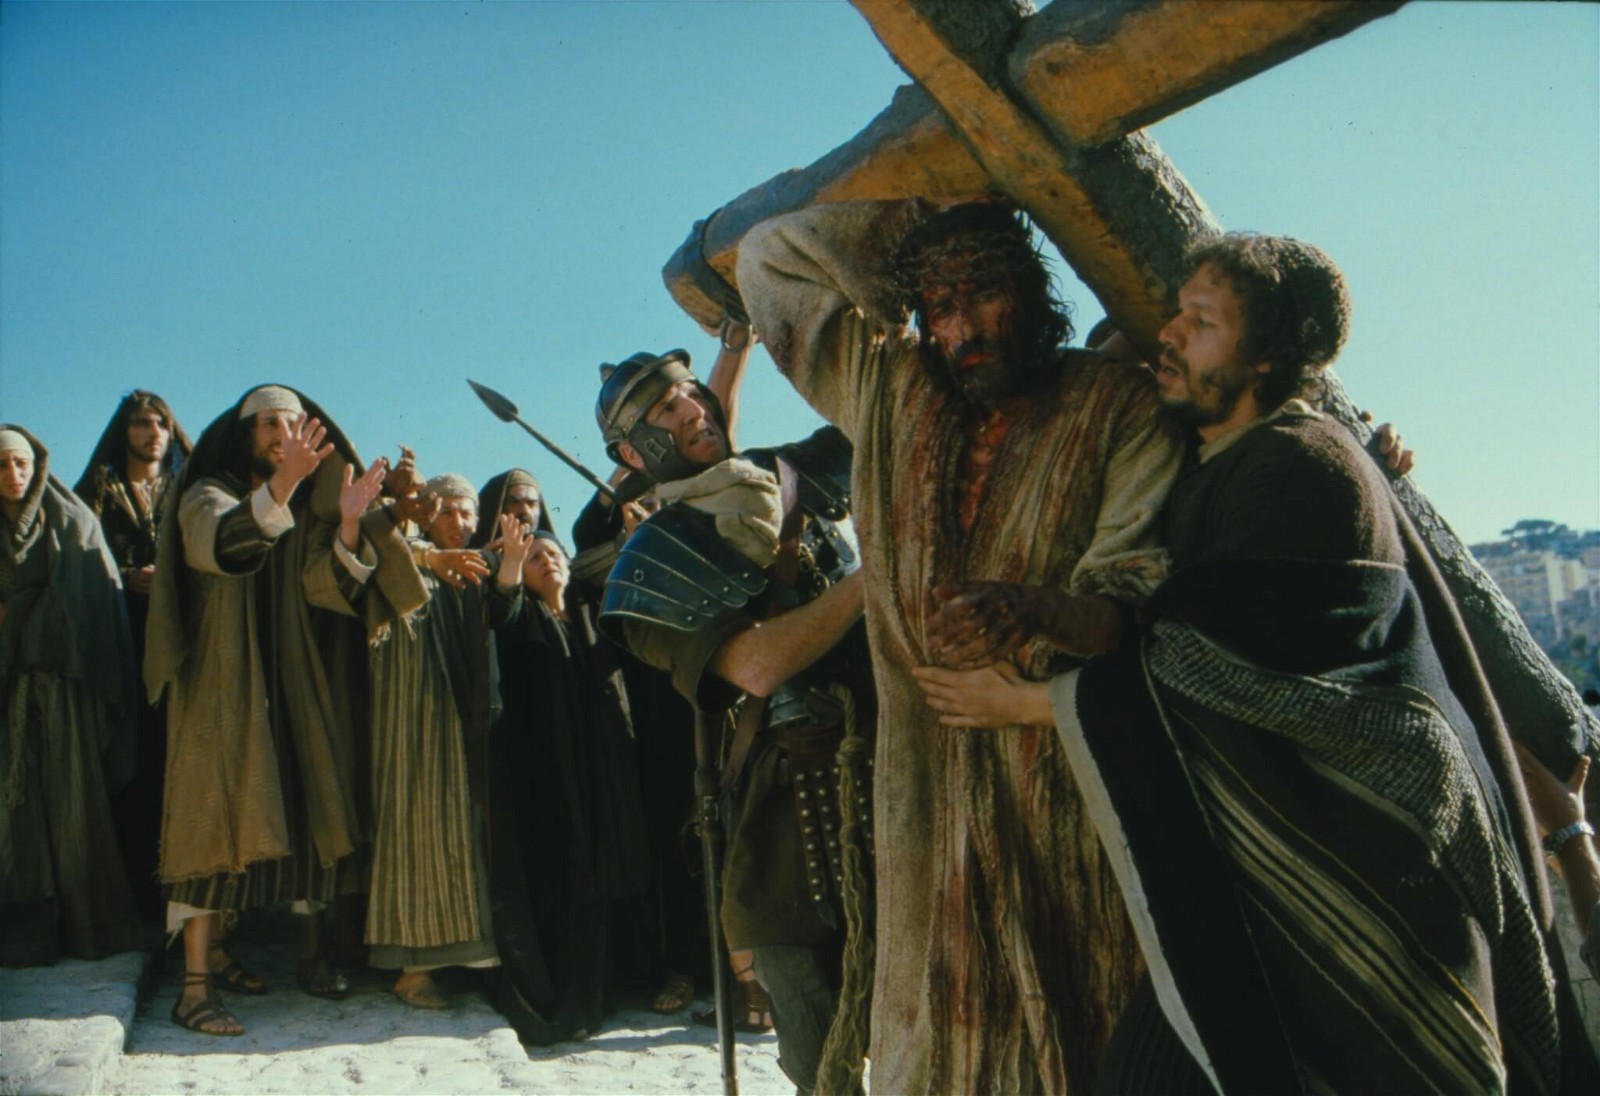 Jim Caviezel lifting the cross in The Passion of the Christ